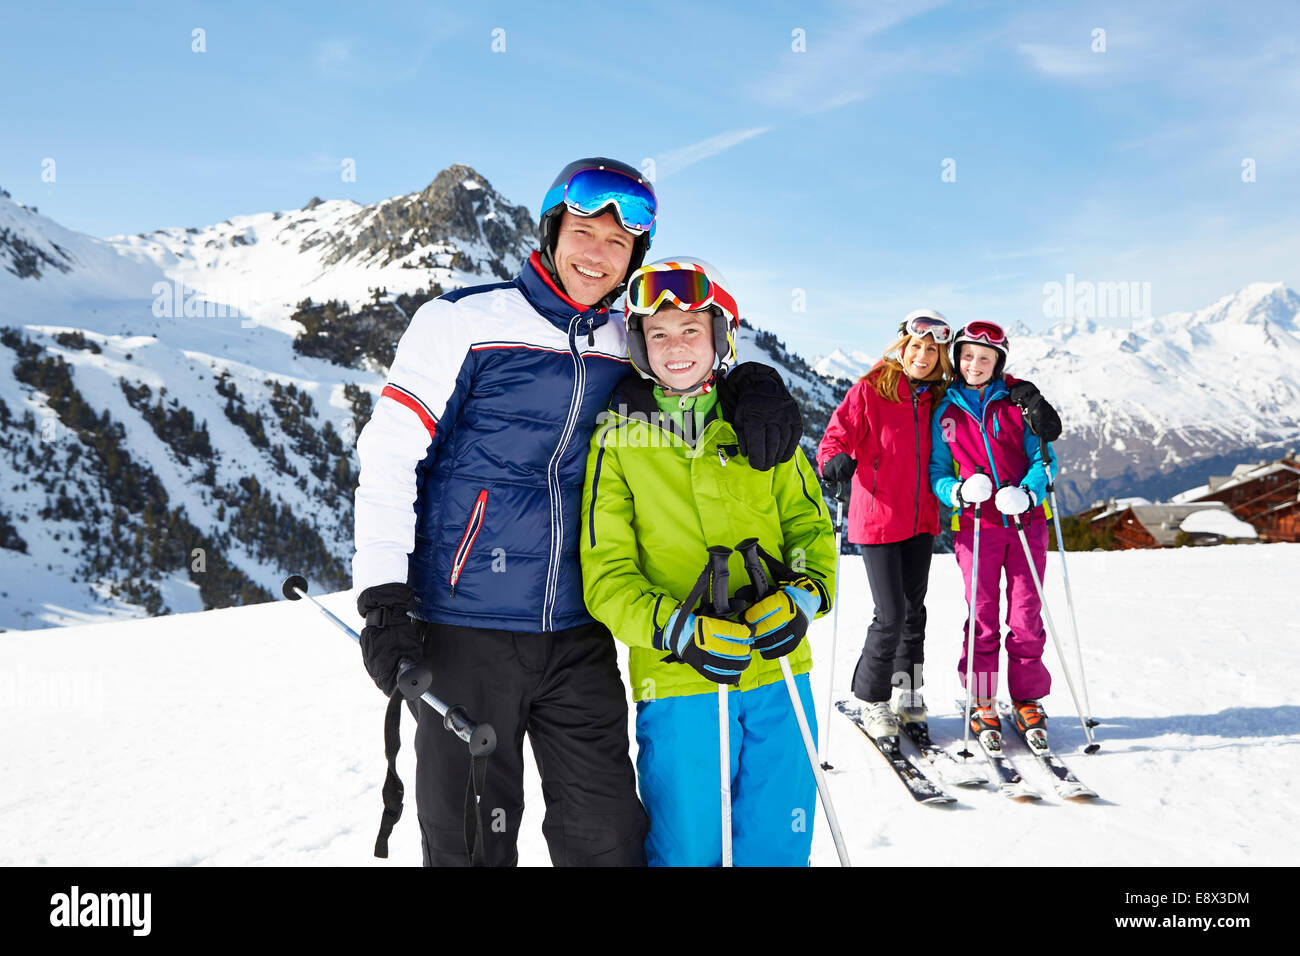 Father and son skiing together Stock Photo